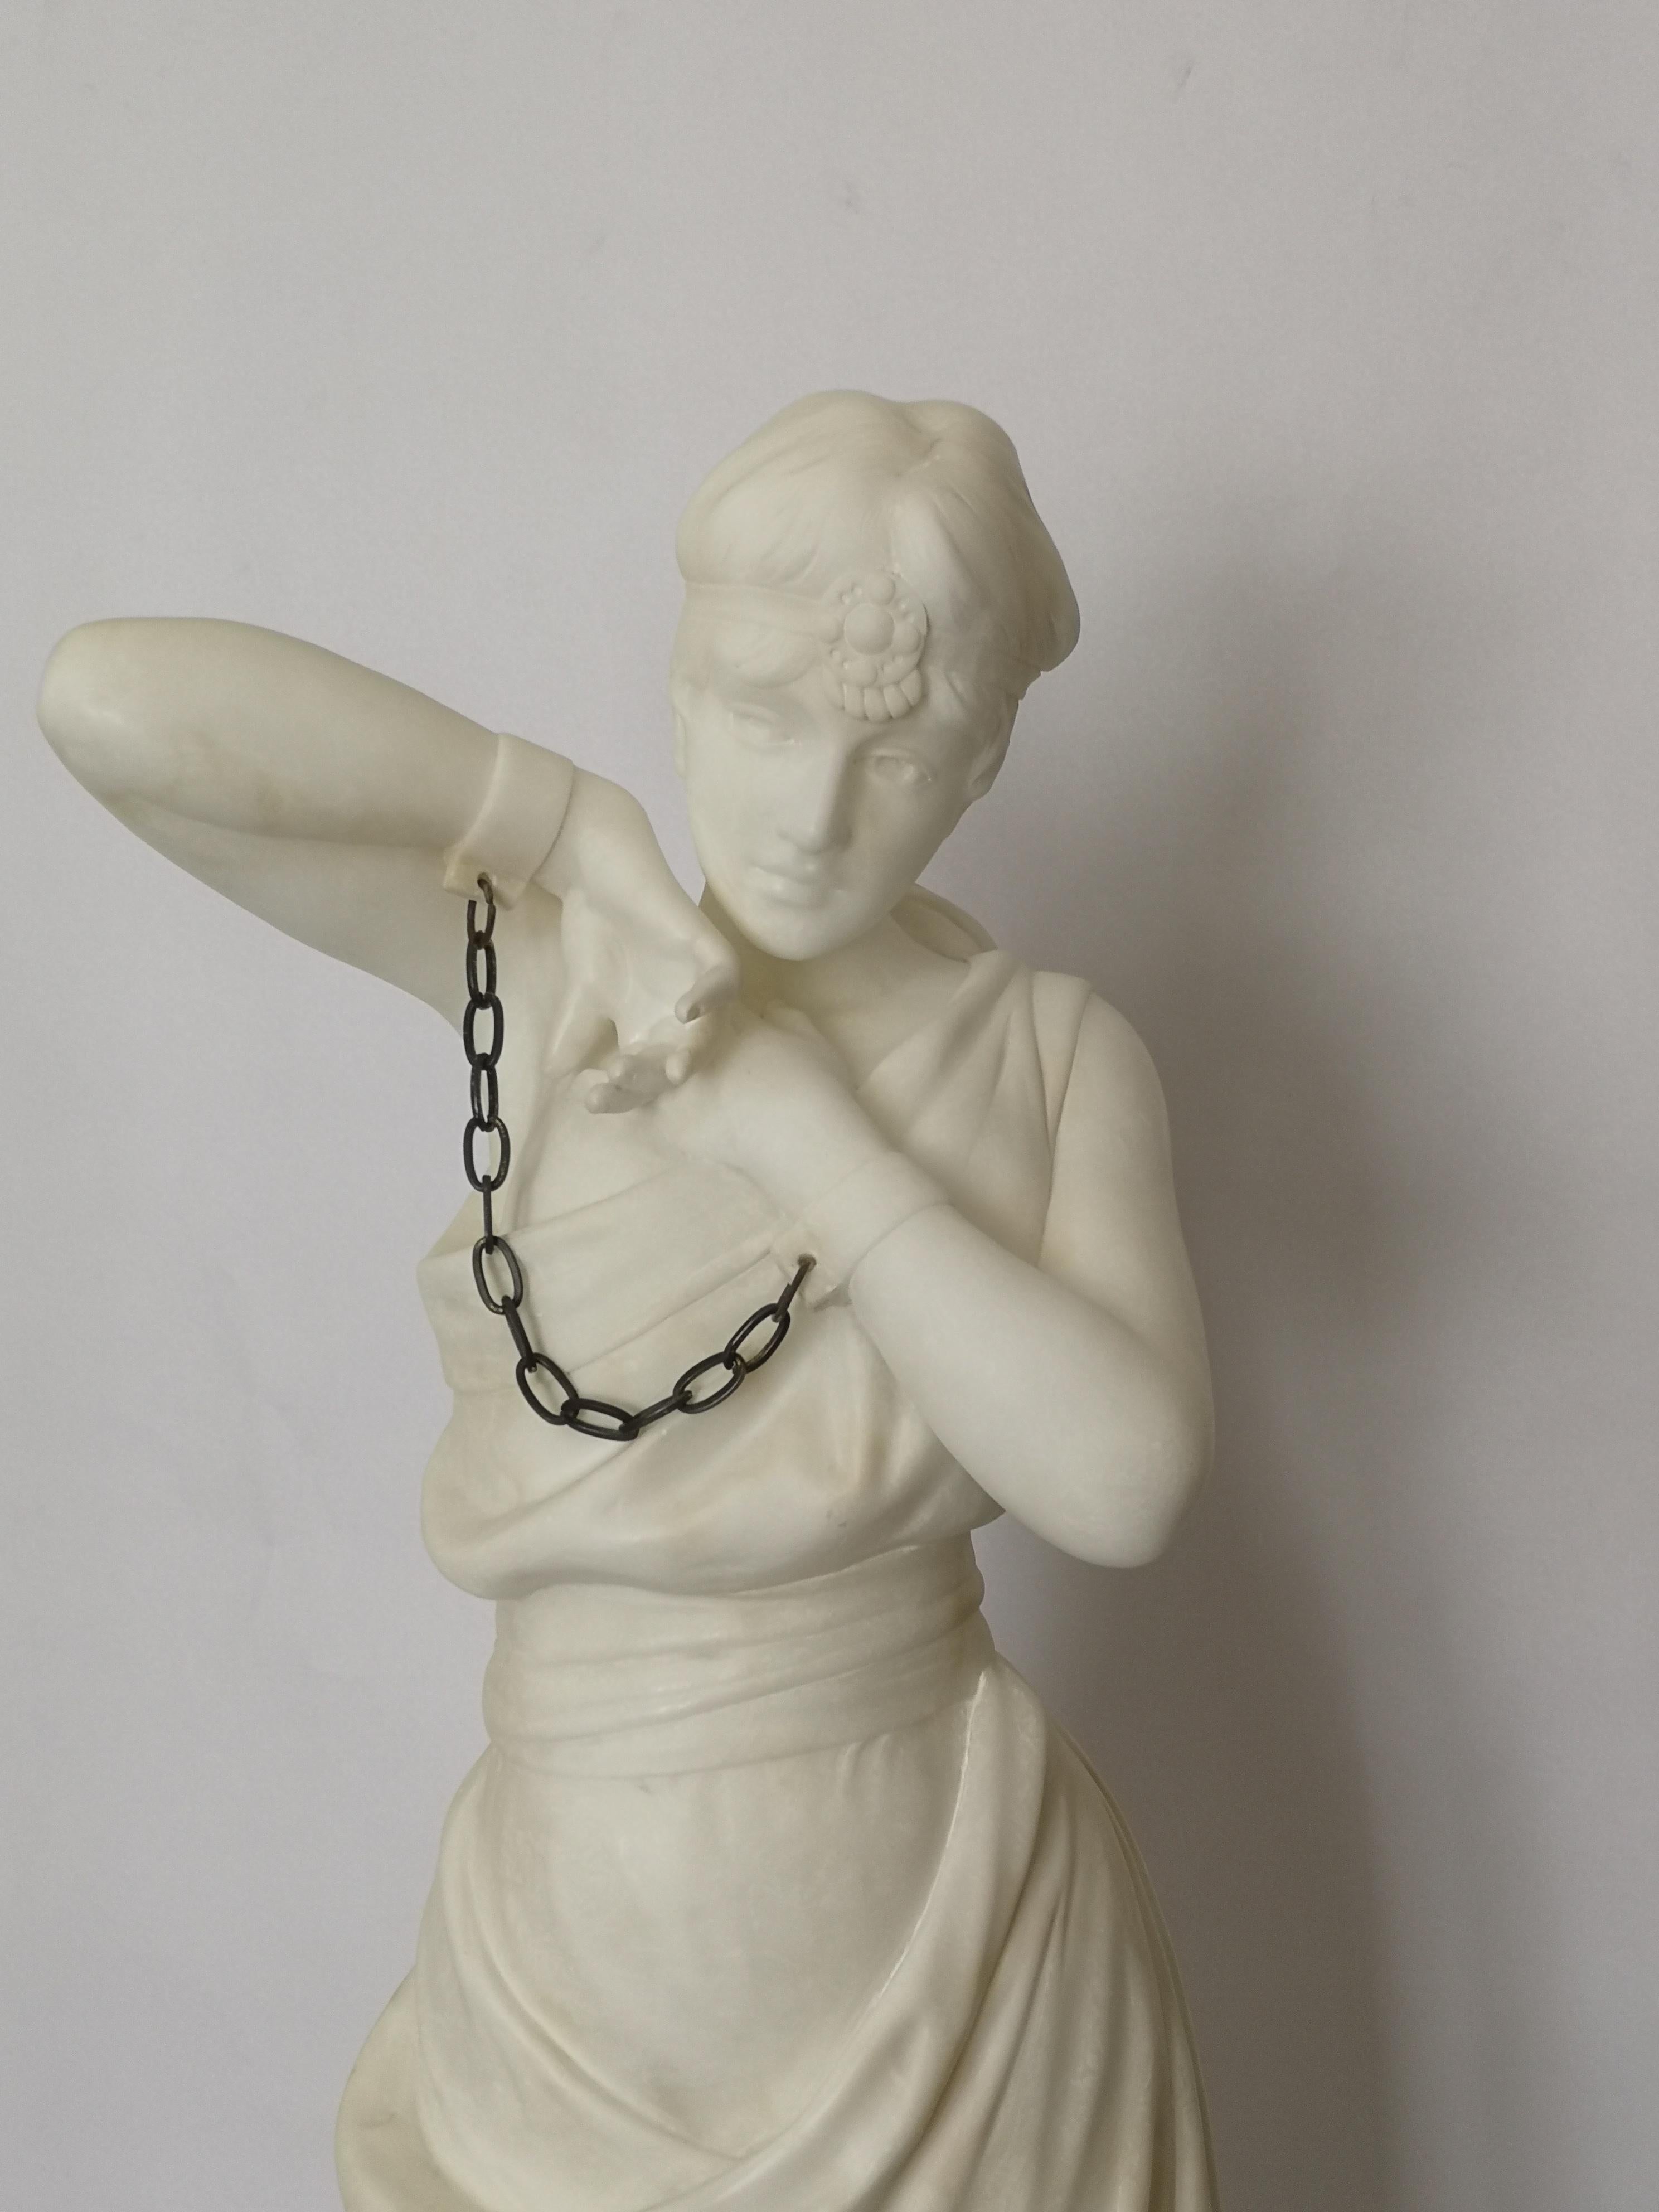 A good sized late 19th century marble sculpture, of a full length woman dressed in a robe, her hands shackled together in bronze chains. Standing on a two stepped base and signed 'Pugi'
Italian, circa 1890.